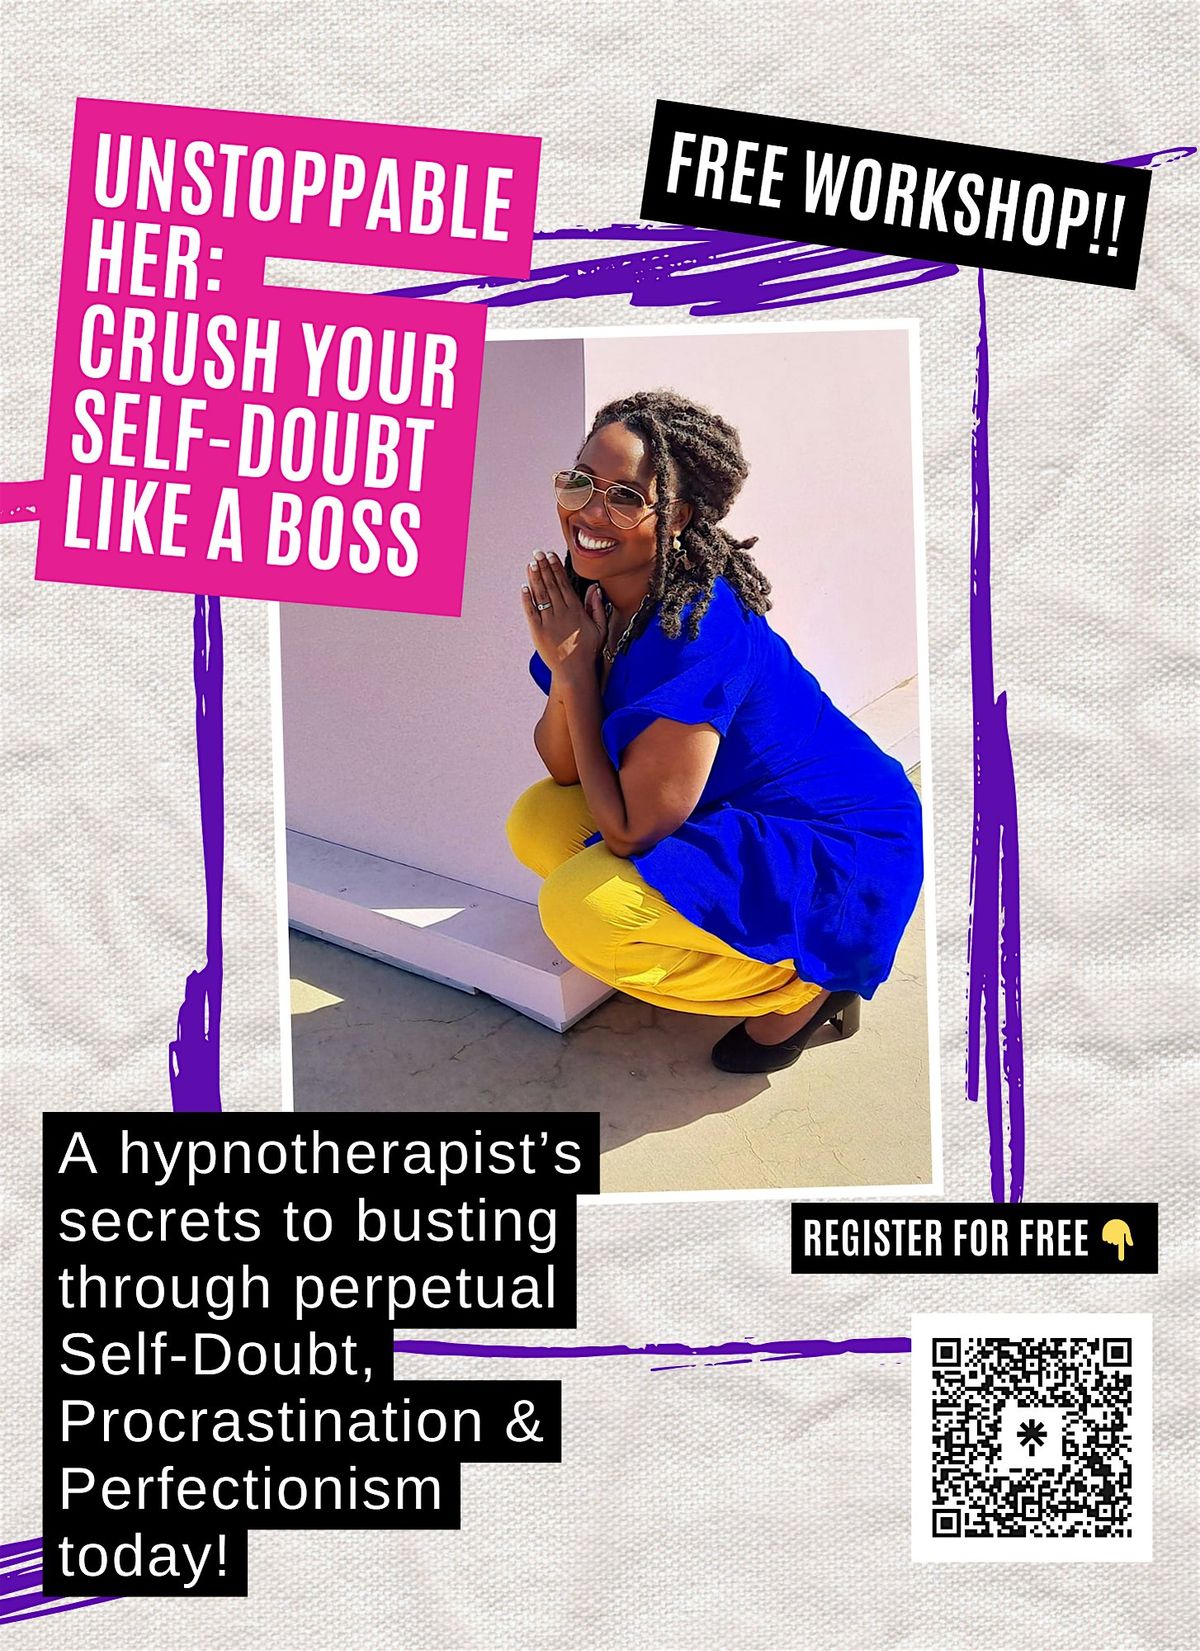 UnstoppableHER: How to Crush Self-Doubt Like a BOSS!